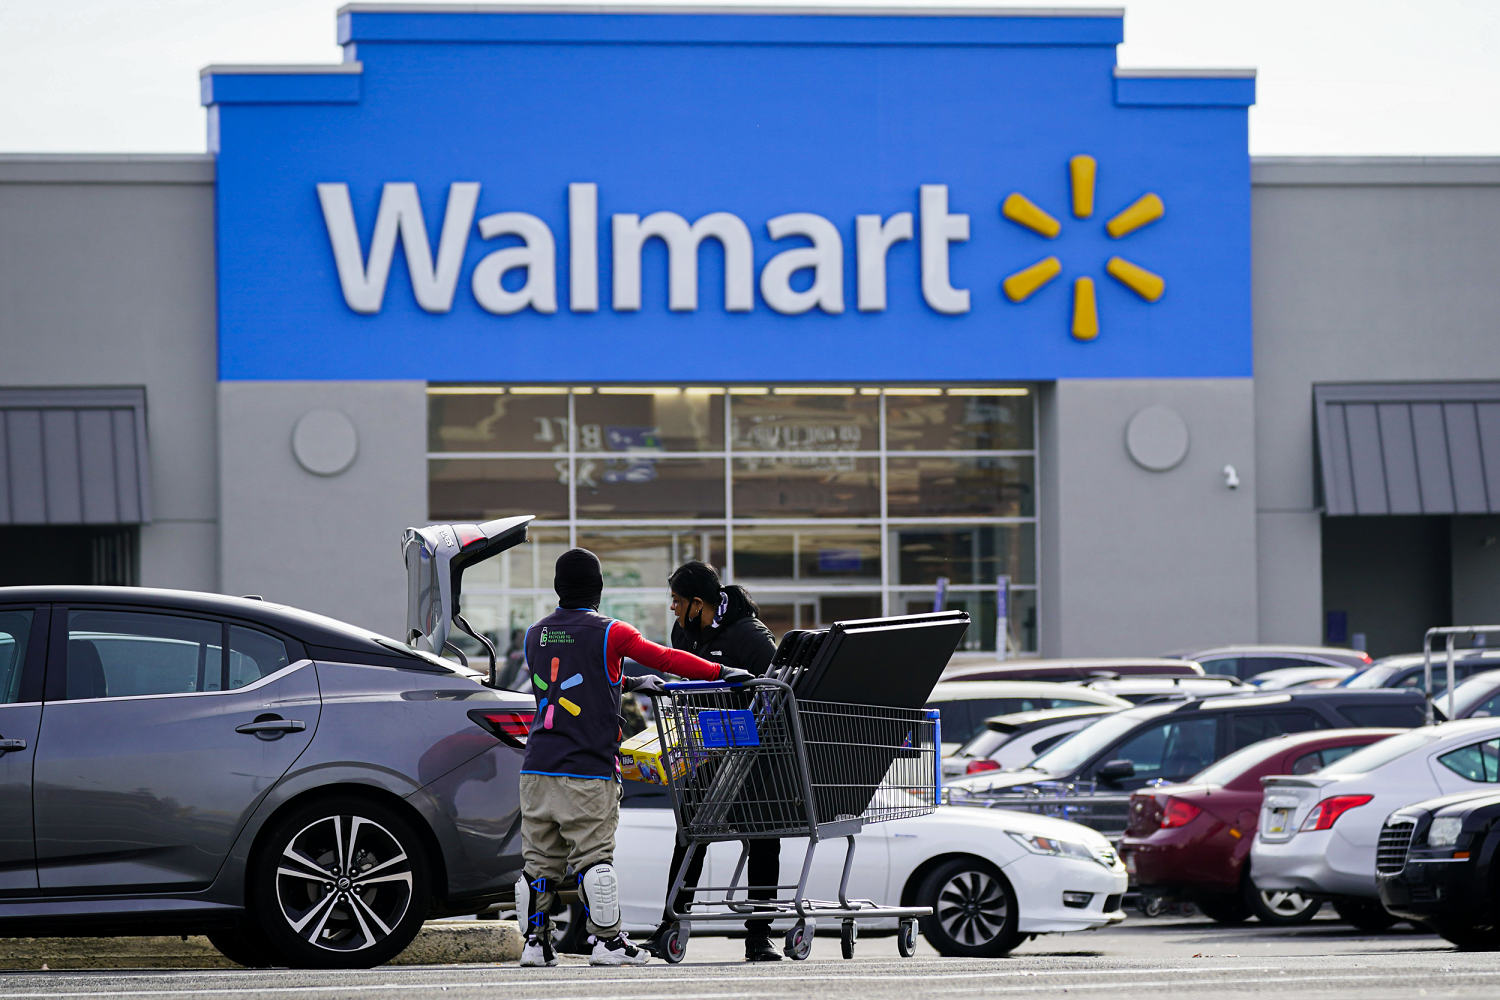 Walmart is laying off and relocating hundreds of corporate workers